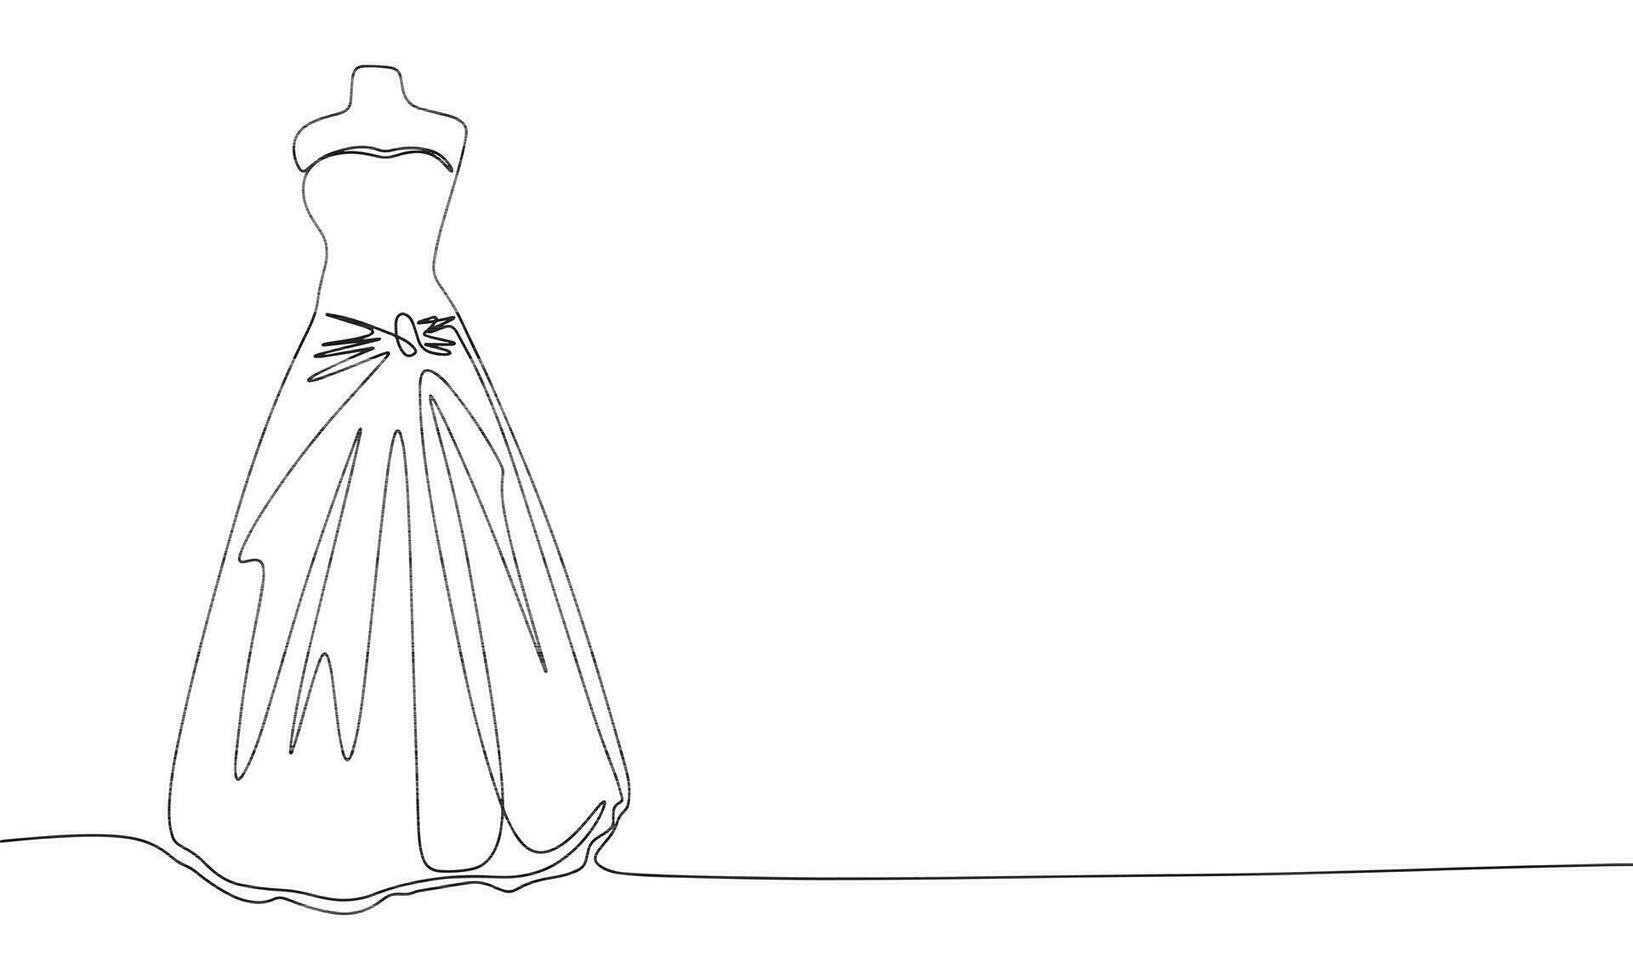 One line fashion dress. Line art dress on clothing mannequin. One line continuous fashion banner. Outline vector illustration.